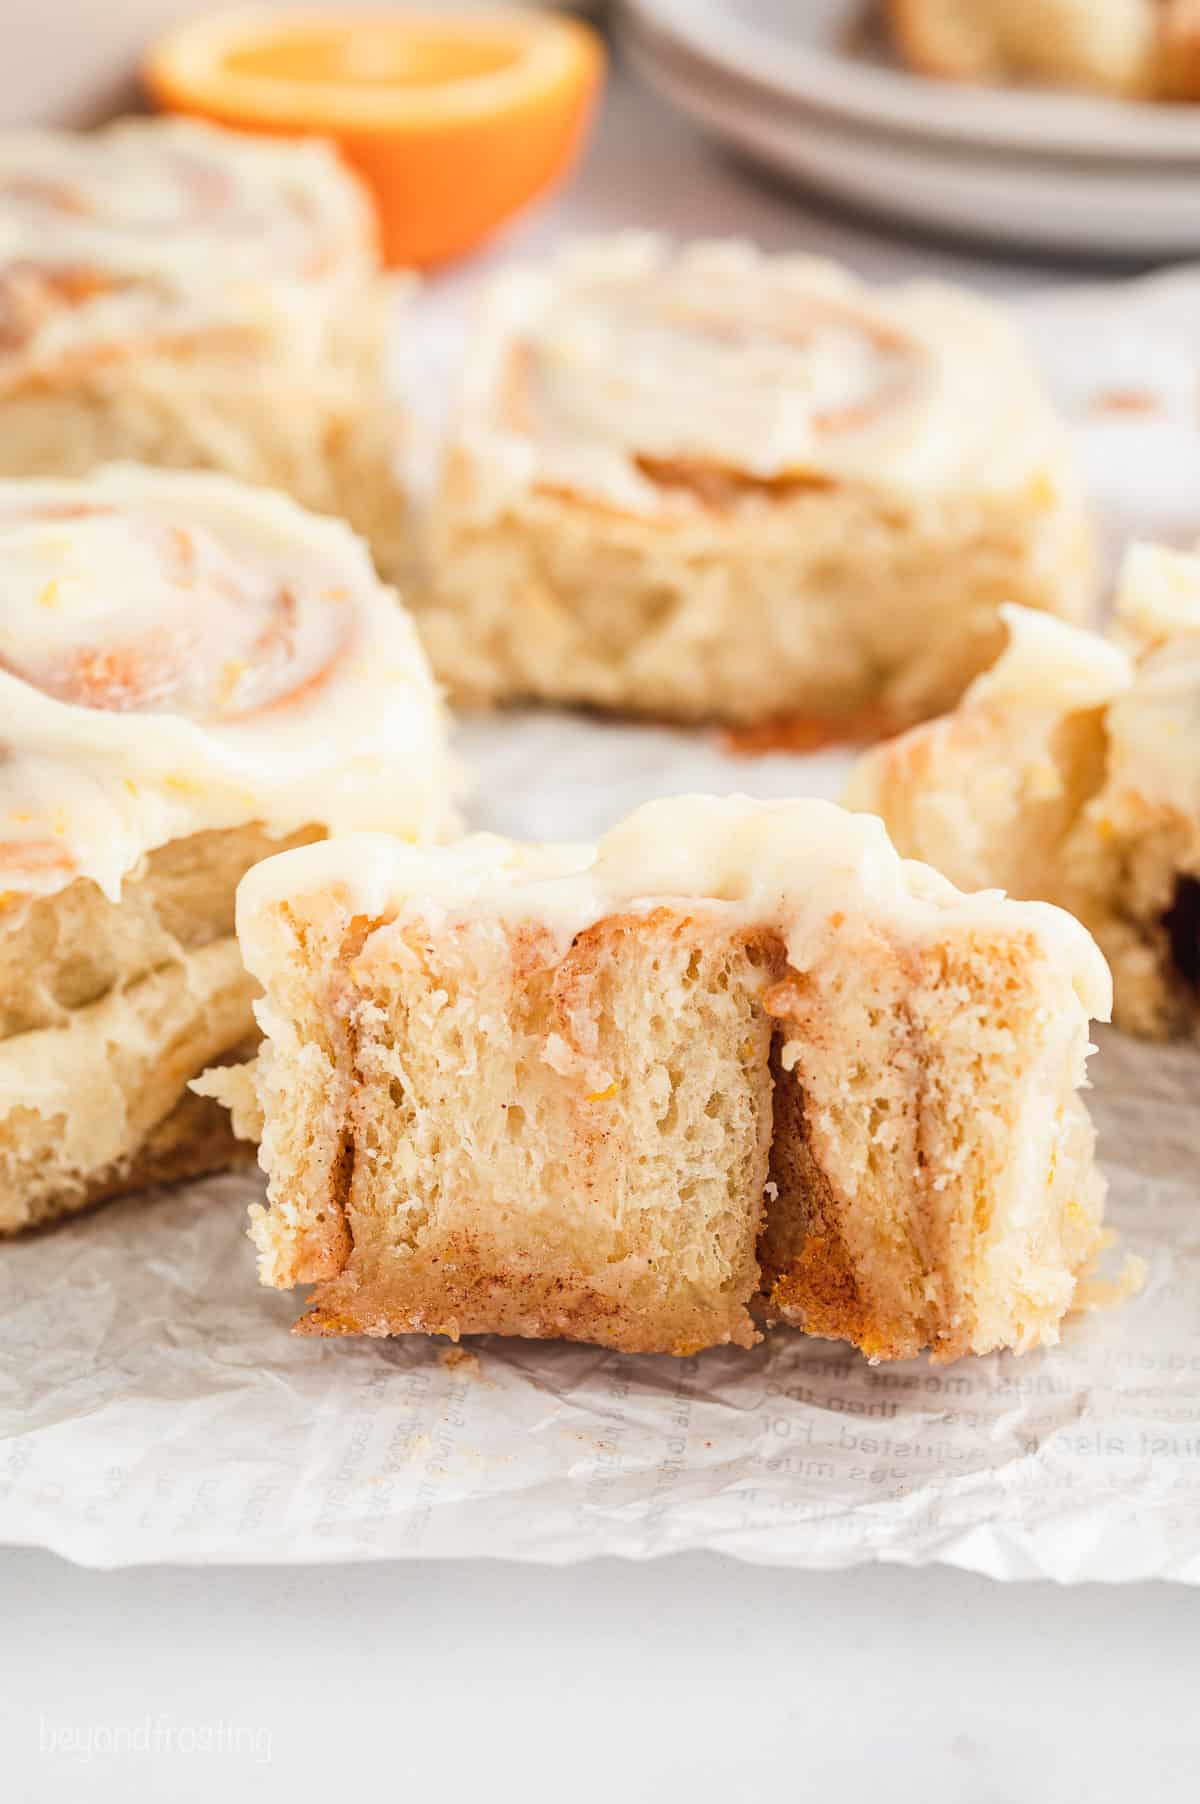 Close up of an orange roll cut in half, with more rolls in the background.